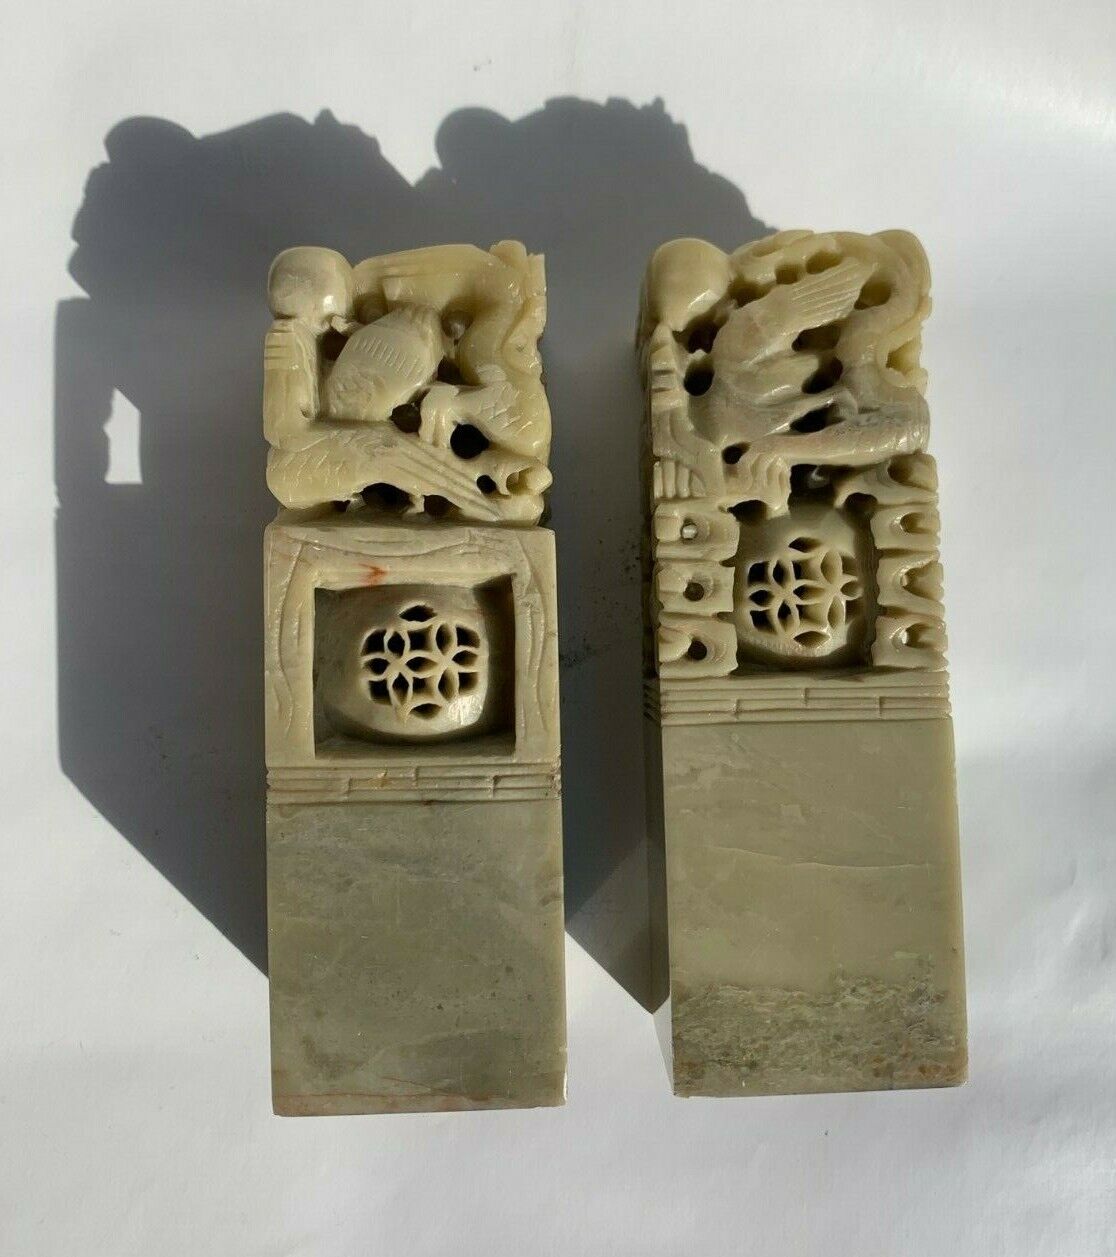 Two (2) CHINESE JADE HAND CARVED STONE NAME STAMPS - "MARTY" & "GIM" Без бренда - фотография #4